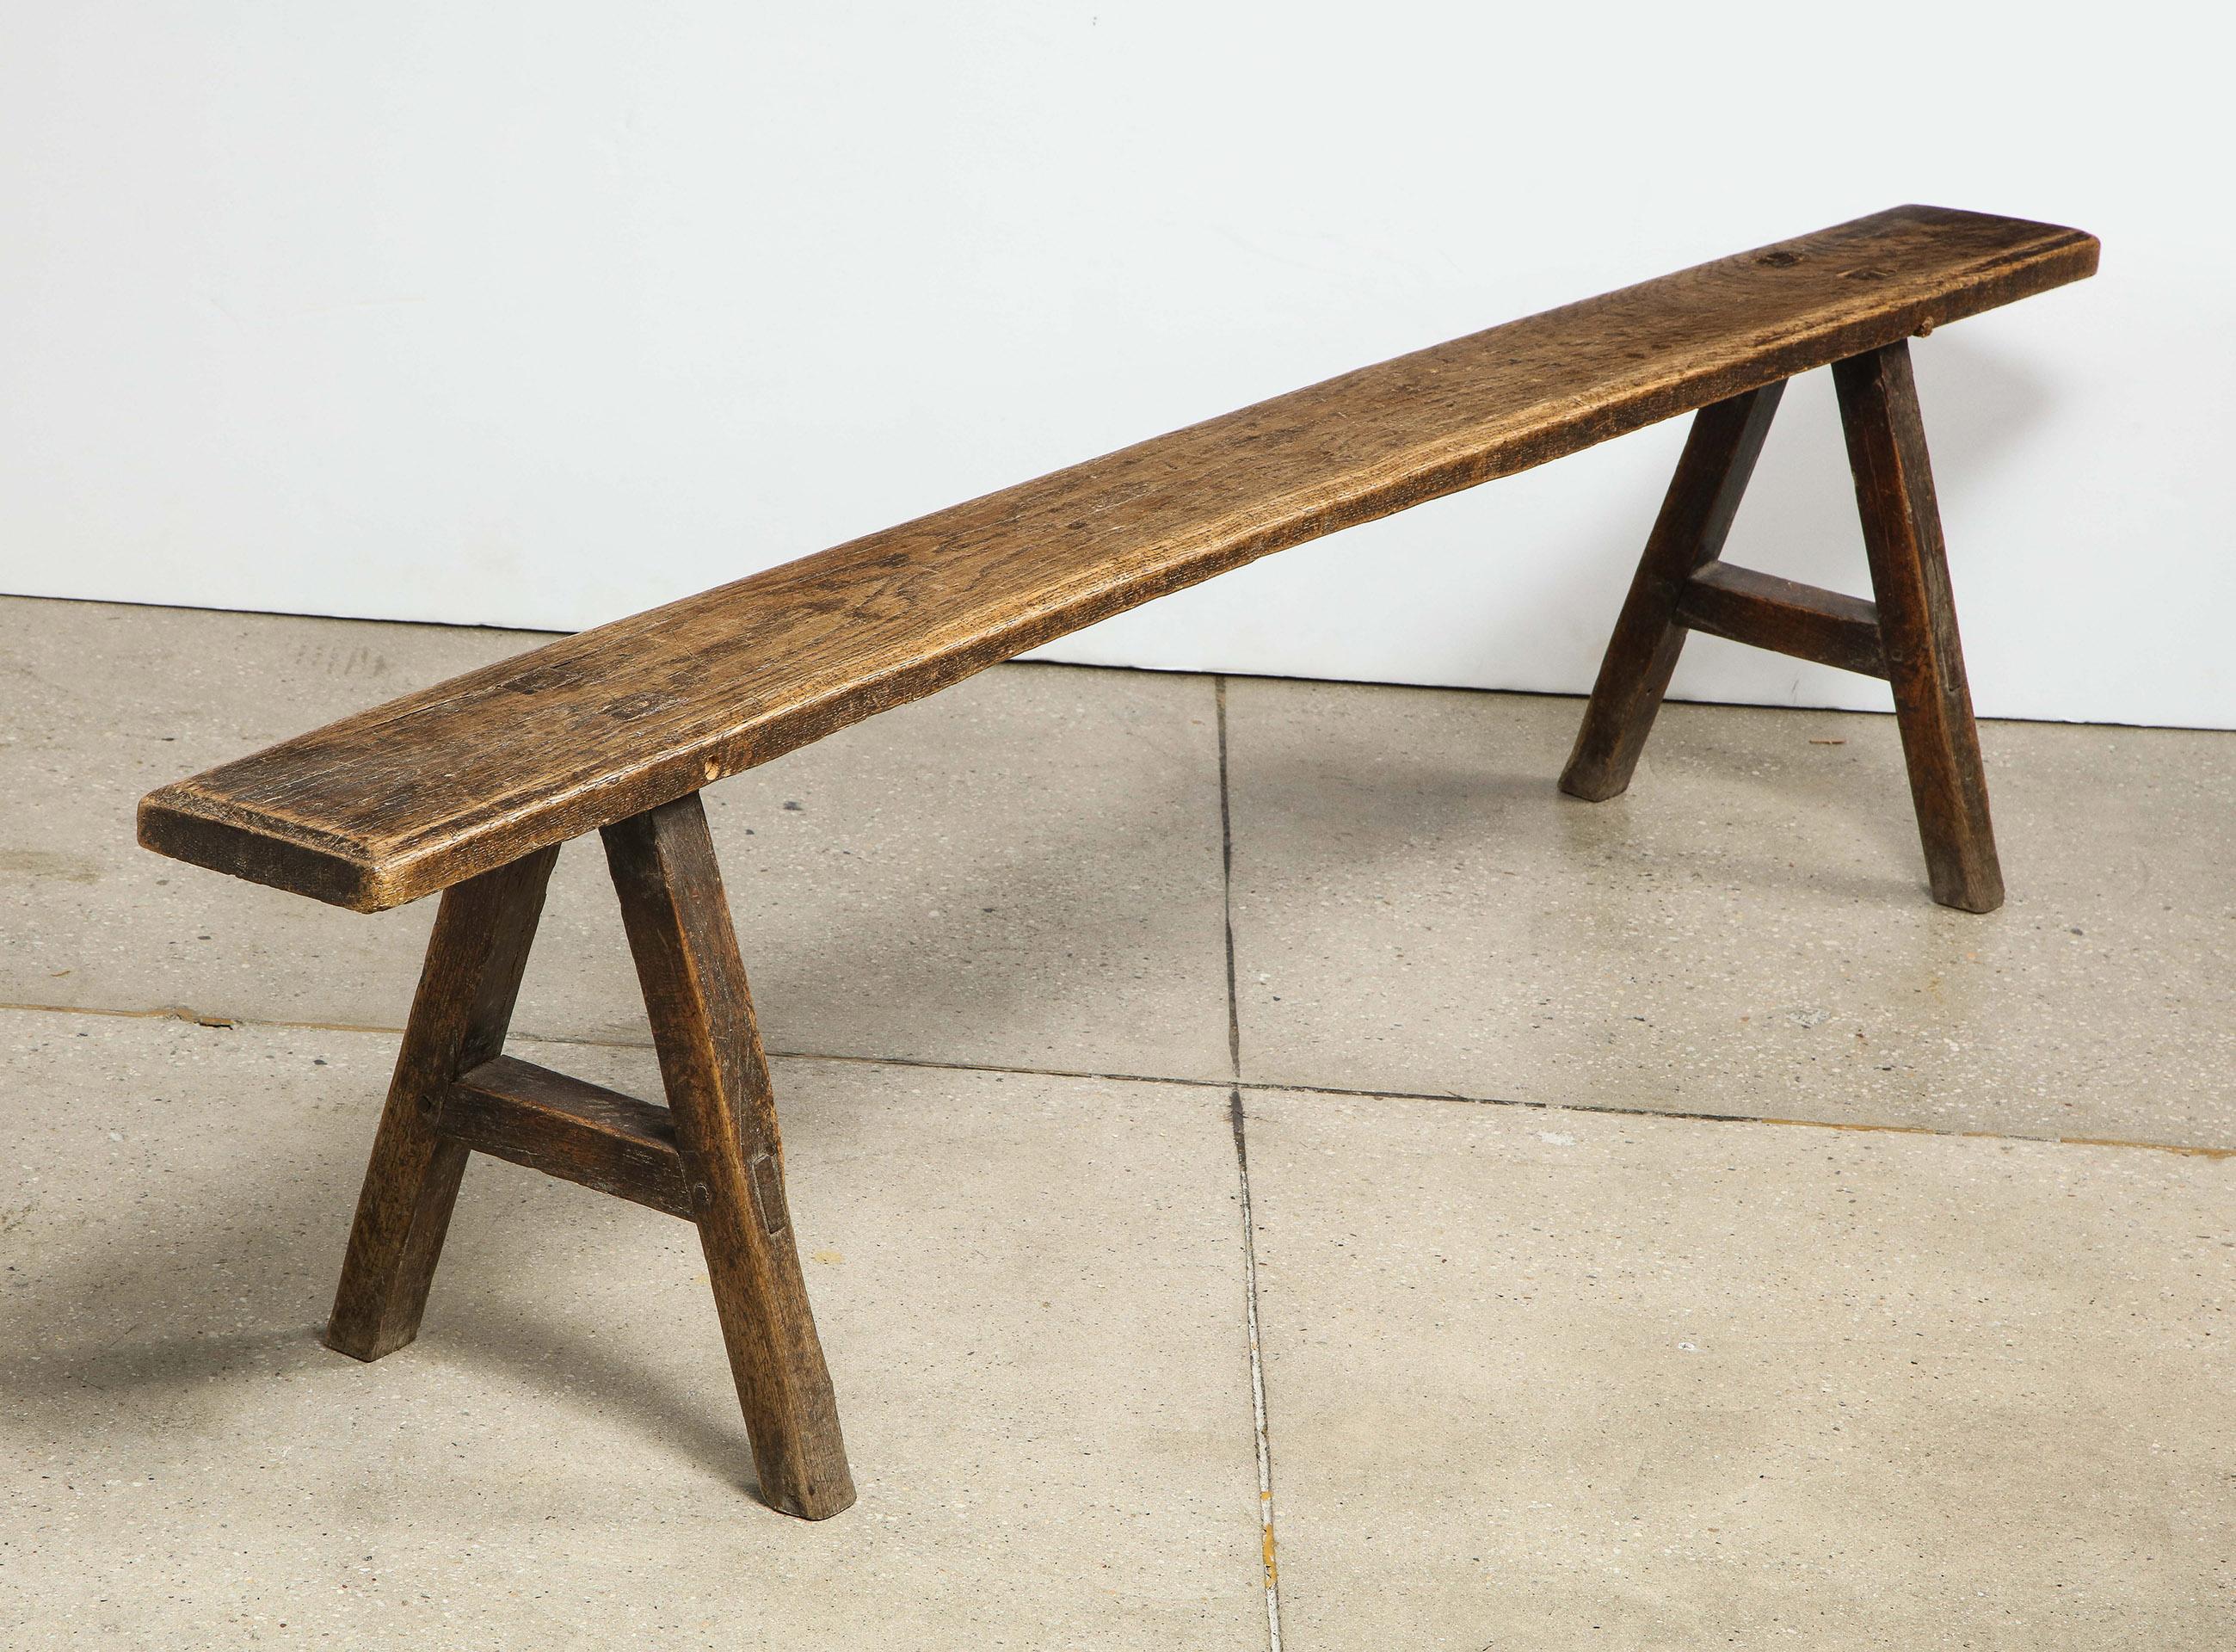 18th century oak bench

The cove molded single plank top supported by a pair of 